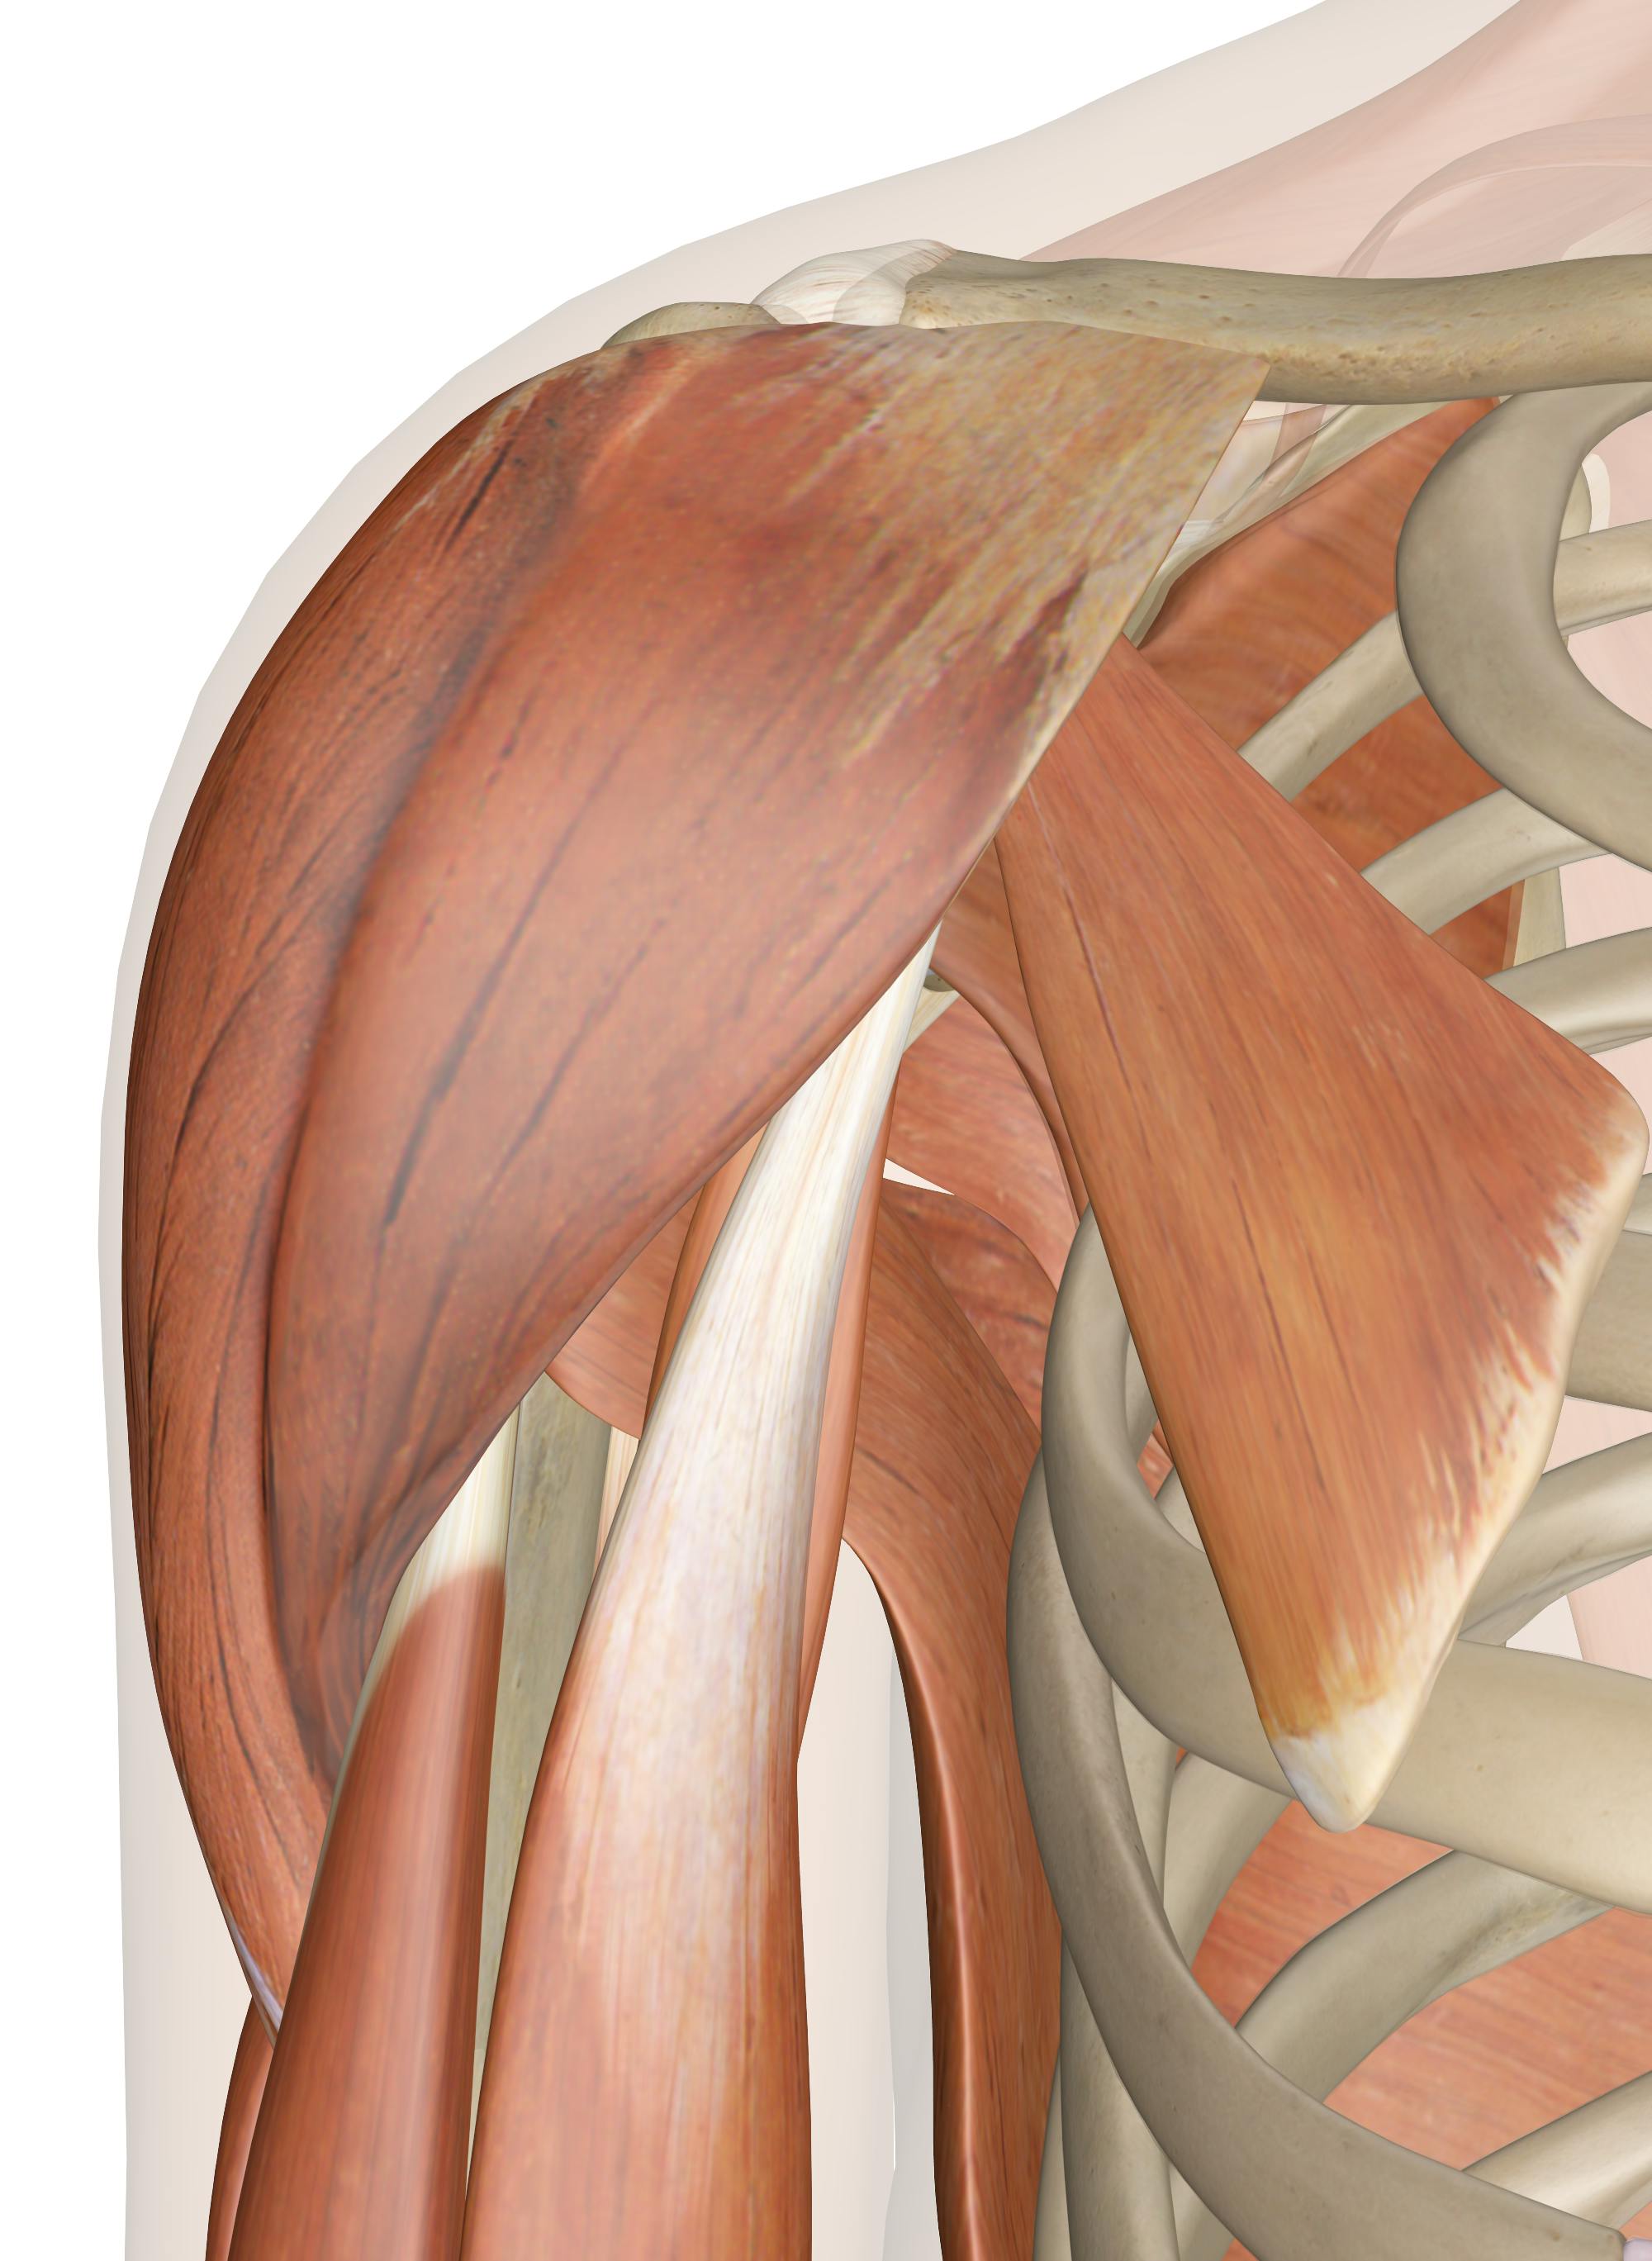 Muscles of the Shoulder Girdle EXPLAINED